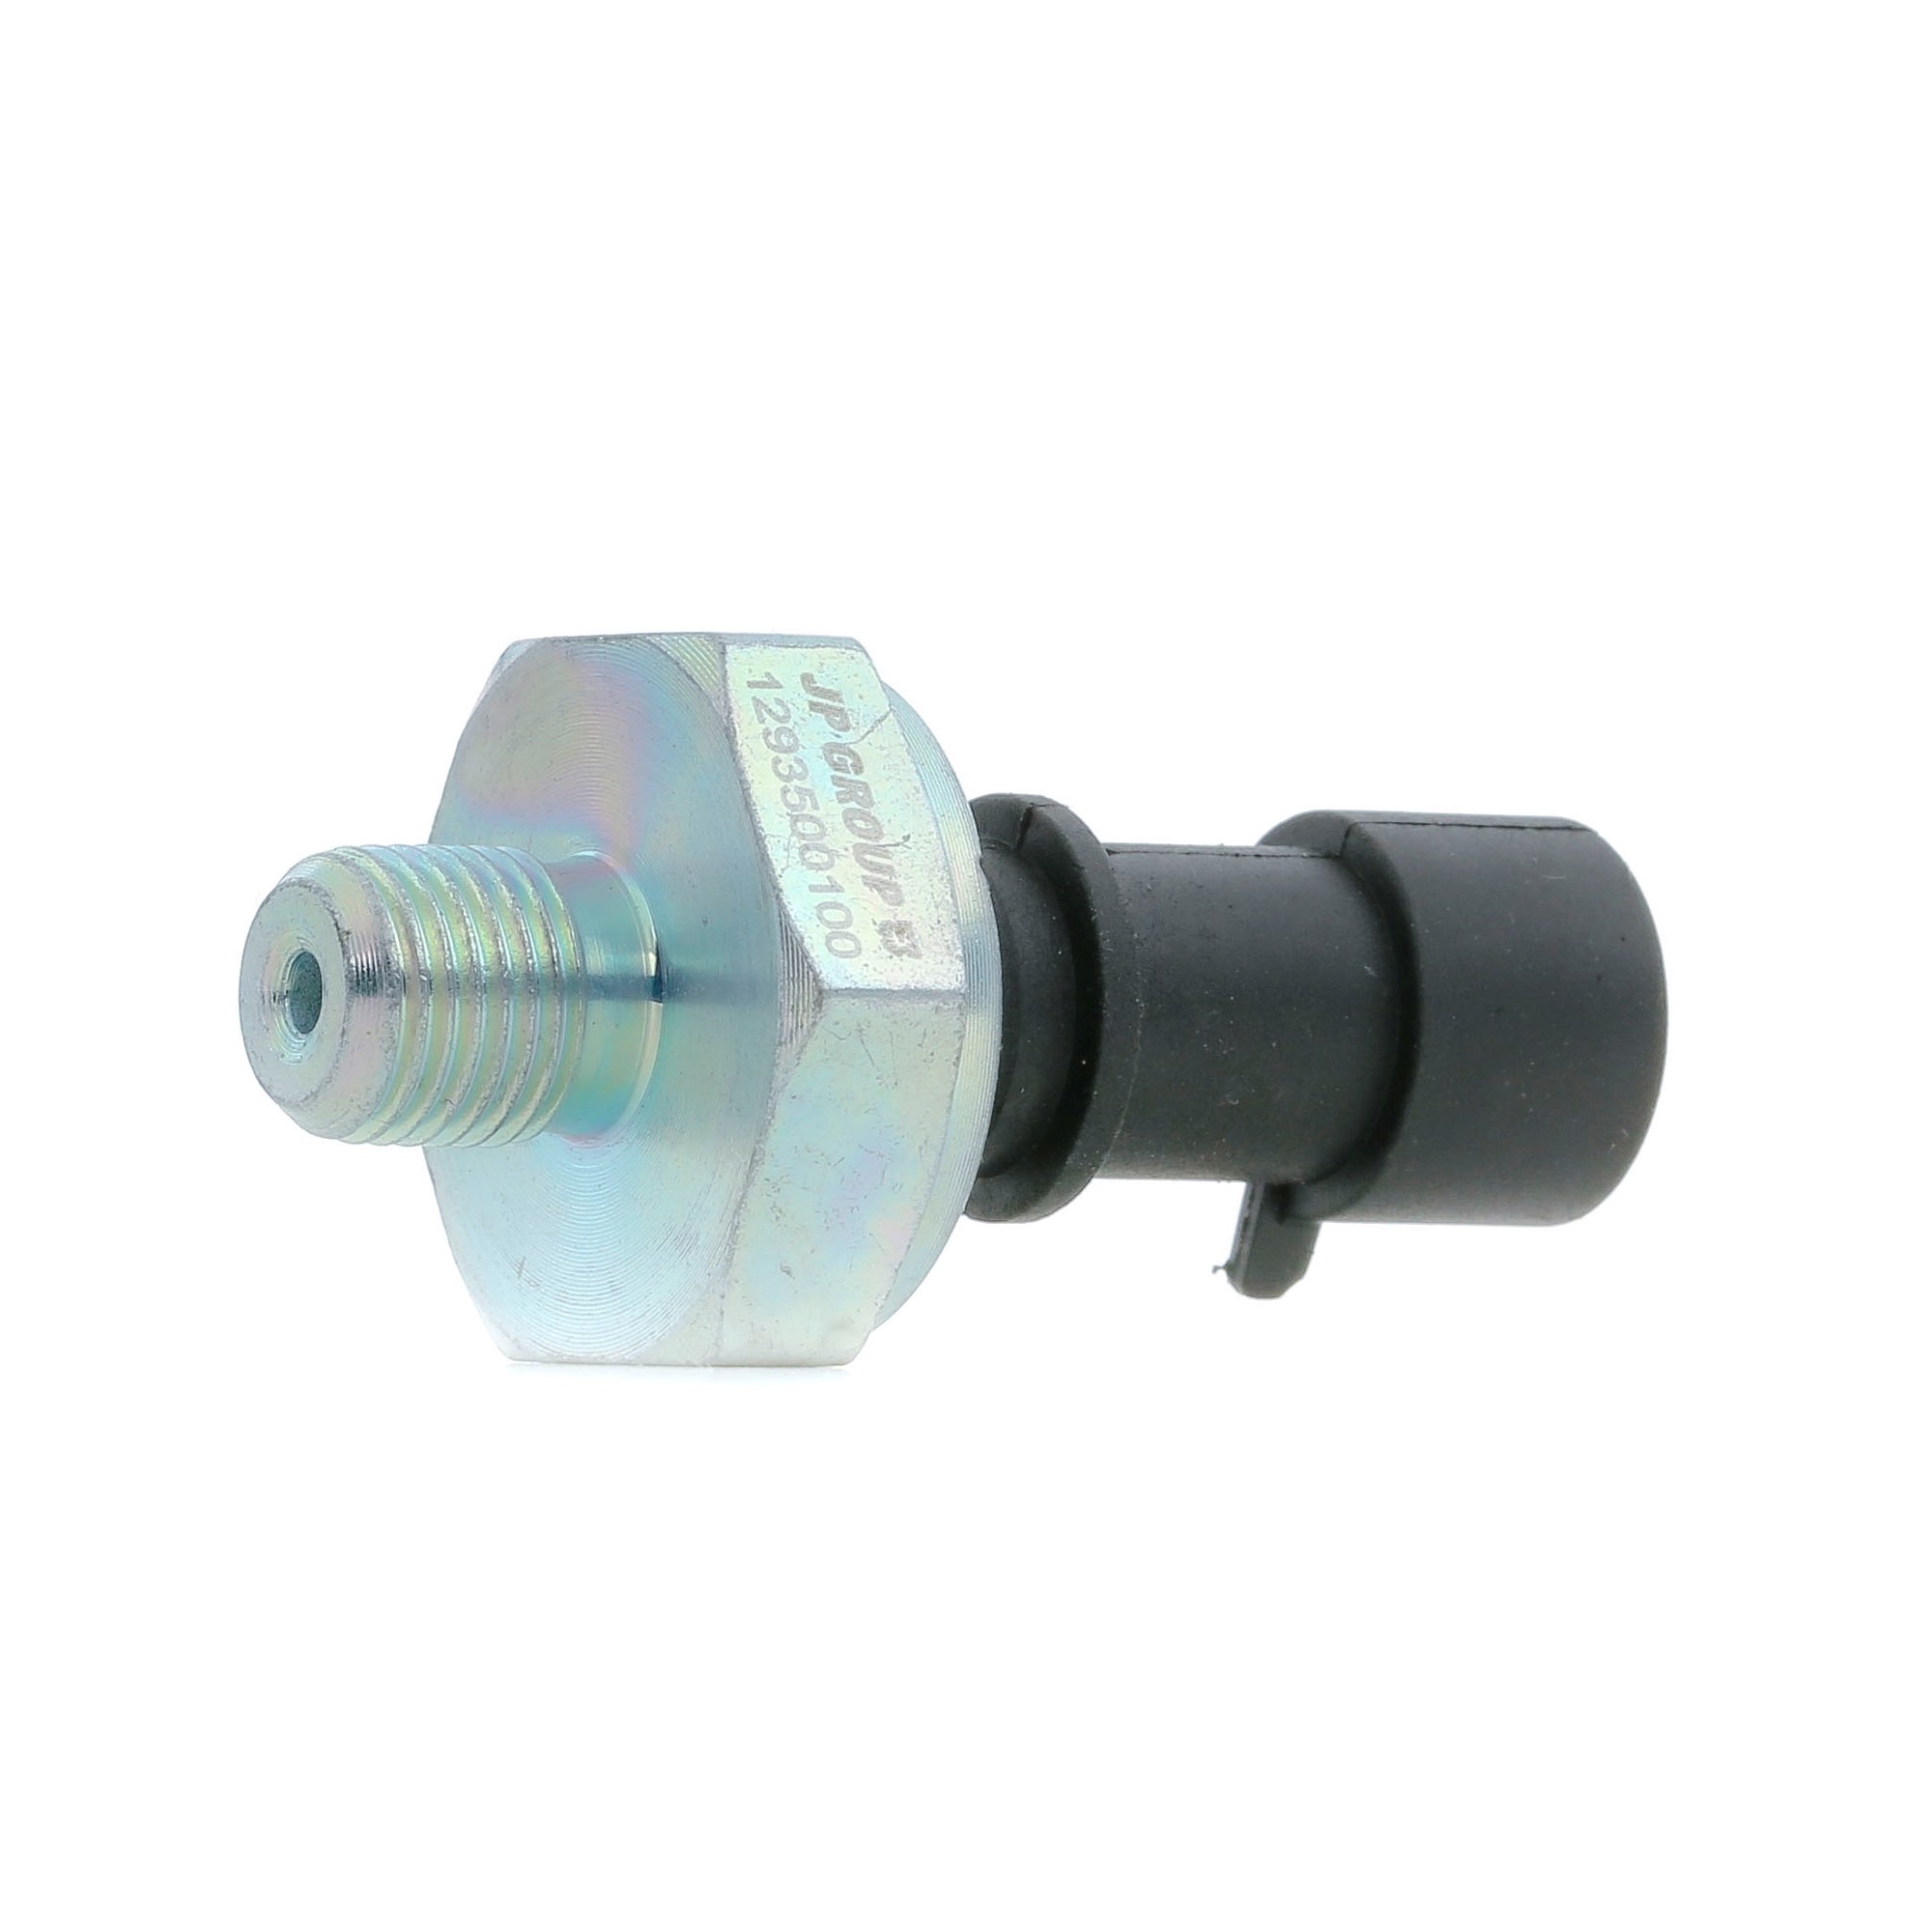 JP GROUP 1293500100 Oil Pressure Switch M10 x 1, 0,4 bar, 0,35 - 0,45 bar, Normally Closed Contact